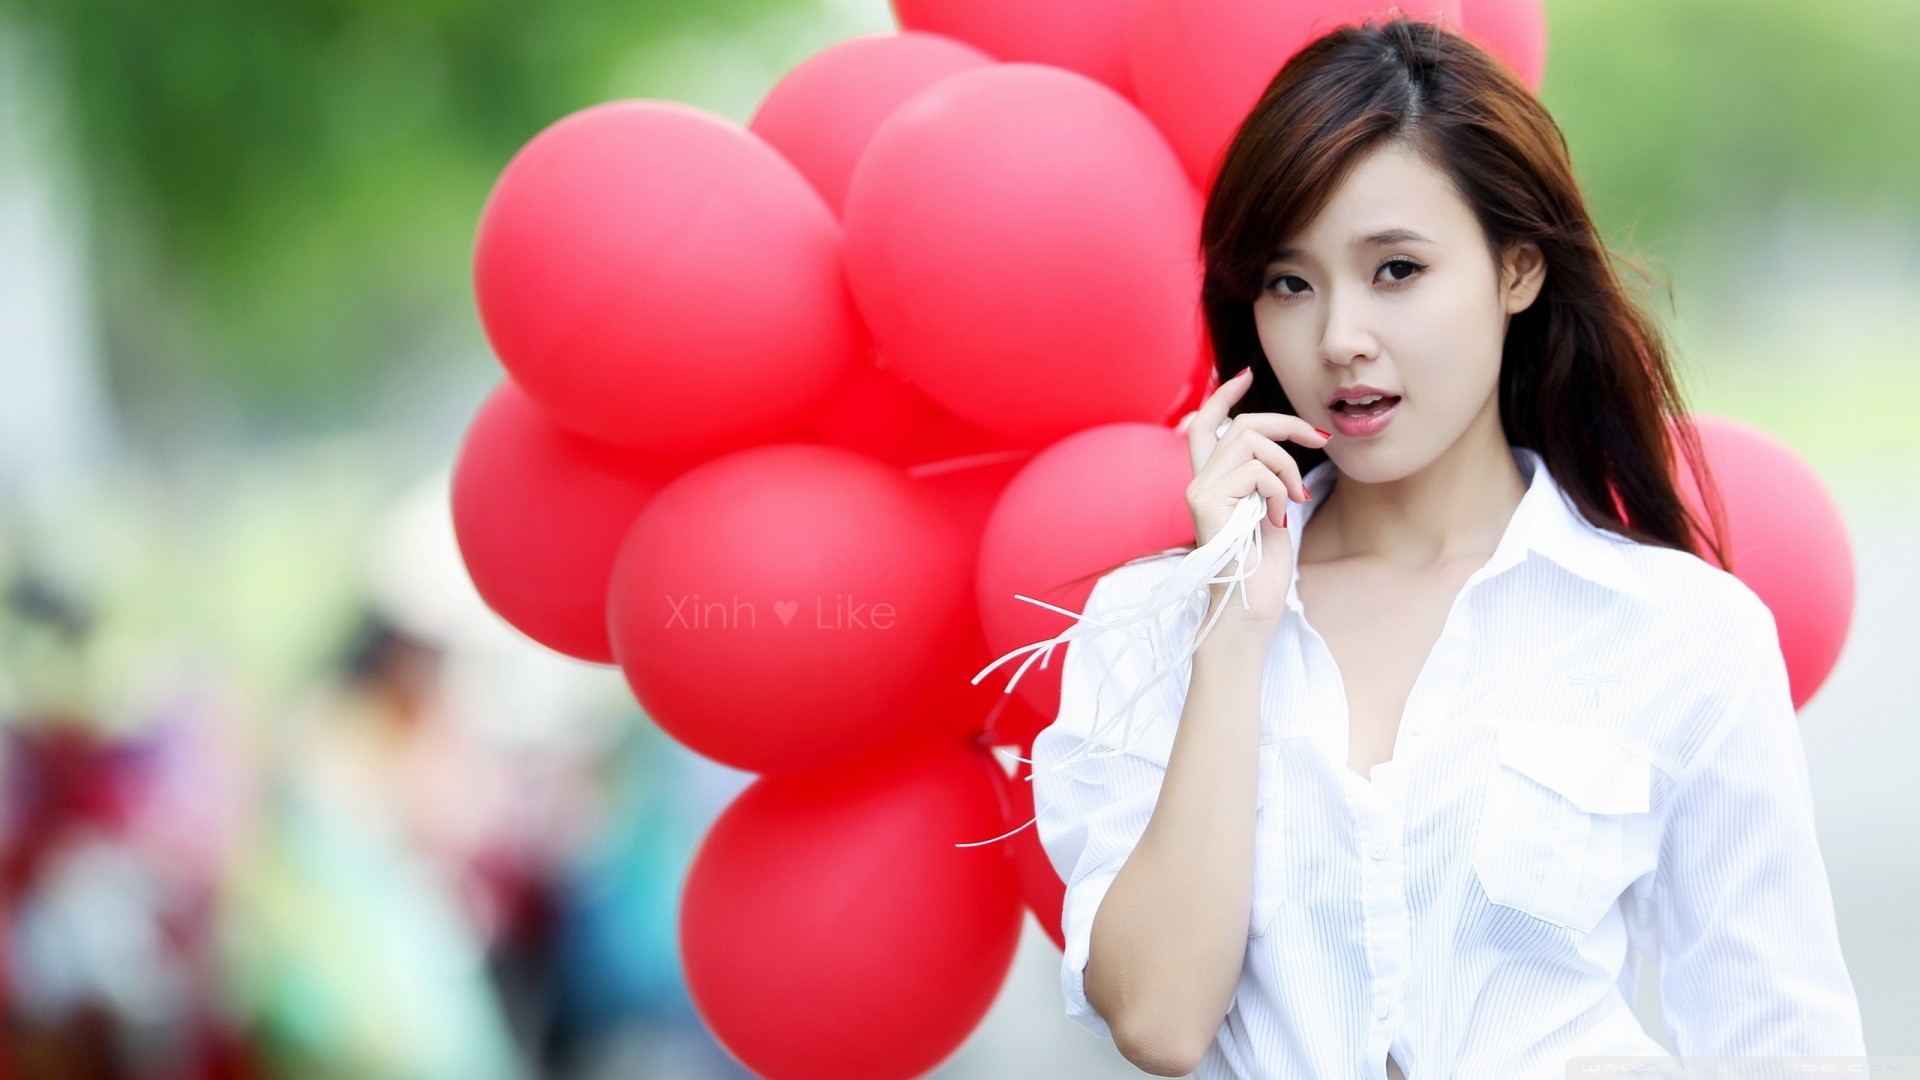 People 1920x1080 Asian long hair white shirt open mouth women brown eyes looking away balloon pale urban women outdoors outdoors model red nails painted nails